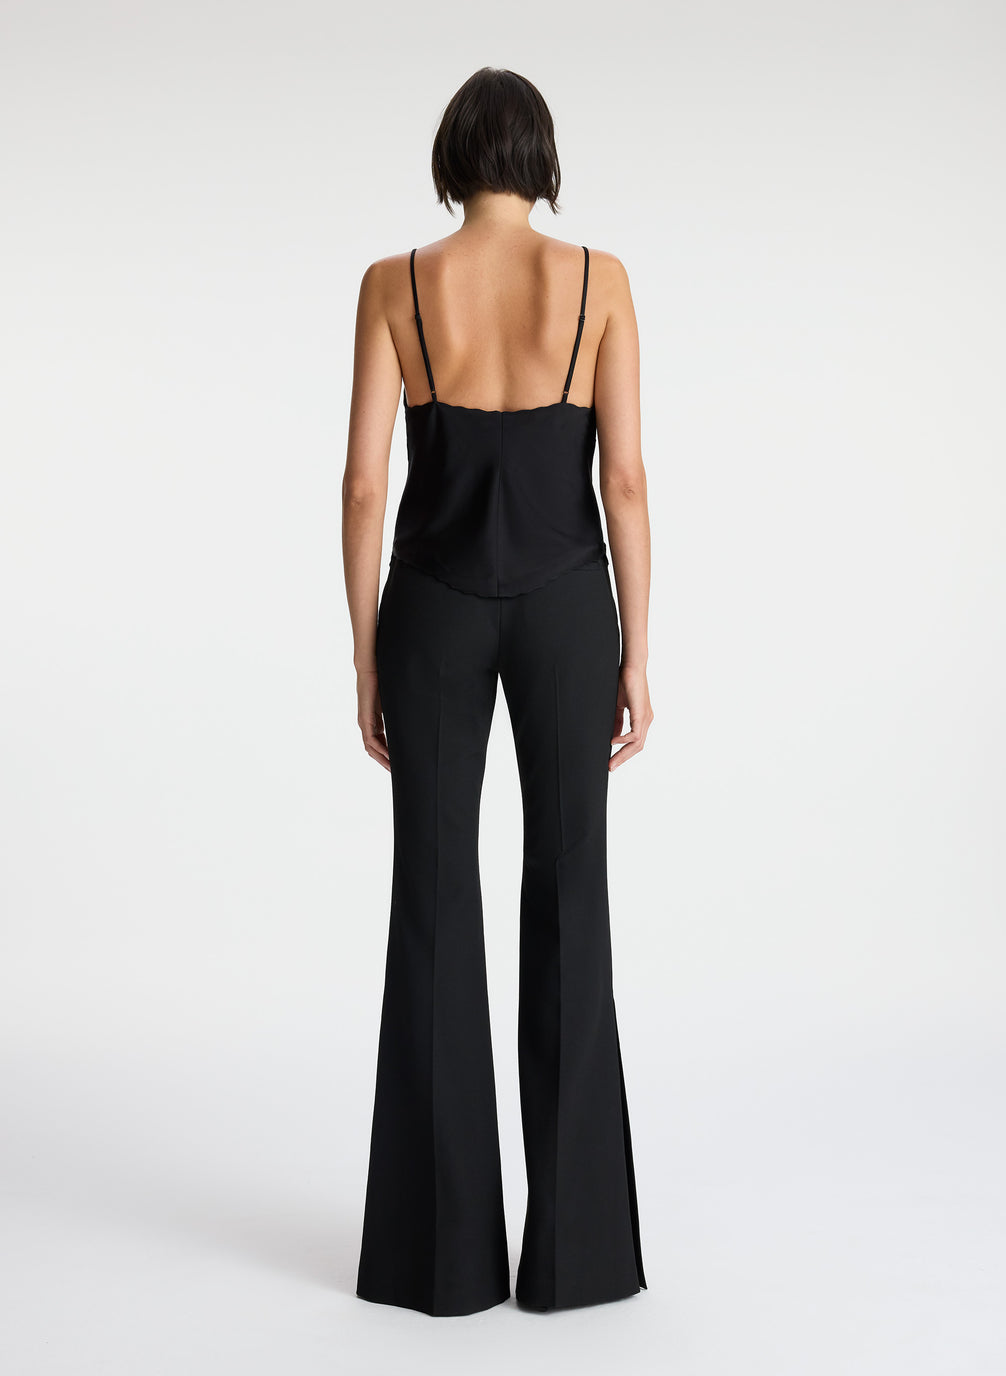 back view of woman wearing black camisole and black flared pants